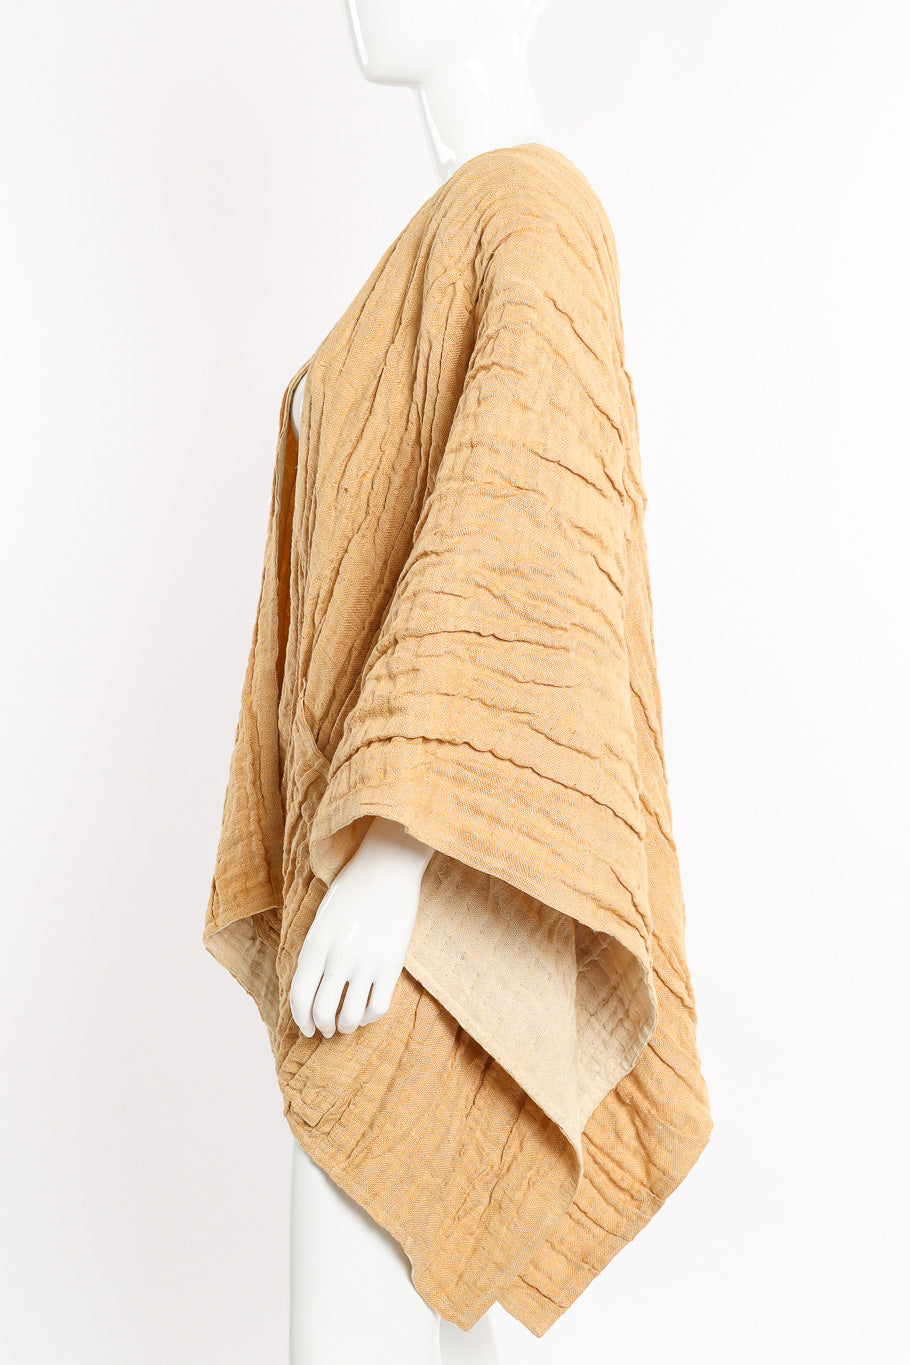 Issey Miyake Flax Linen Pleated Kimono side view on mannequin @Recessla